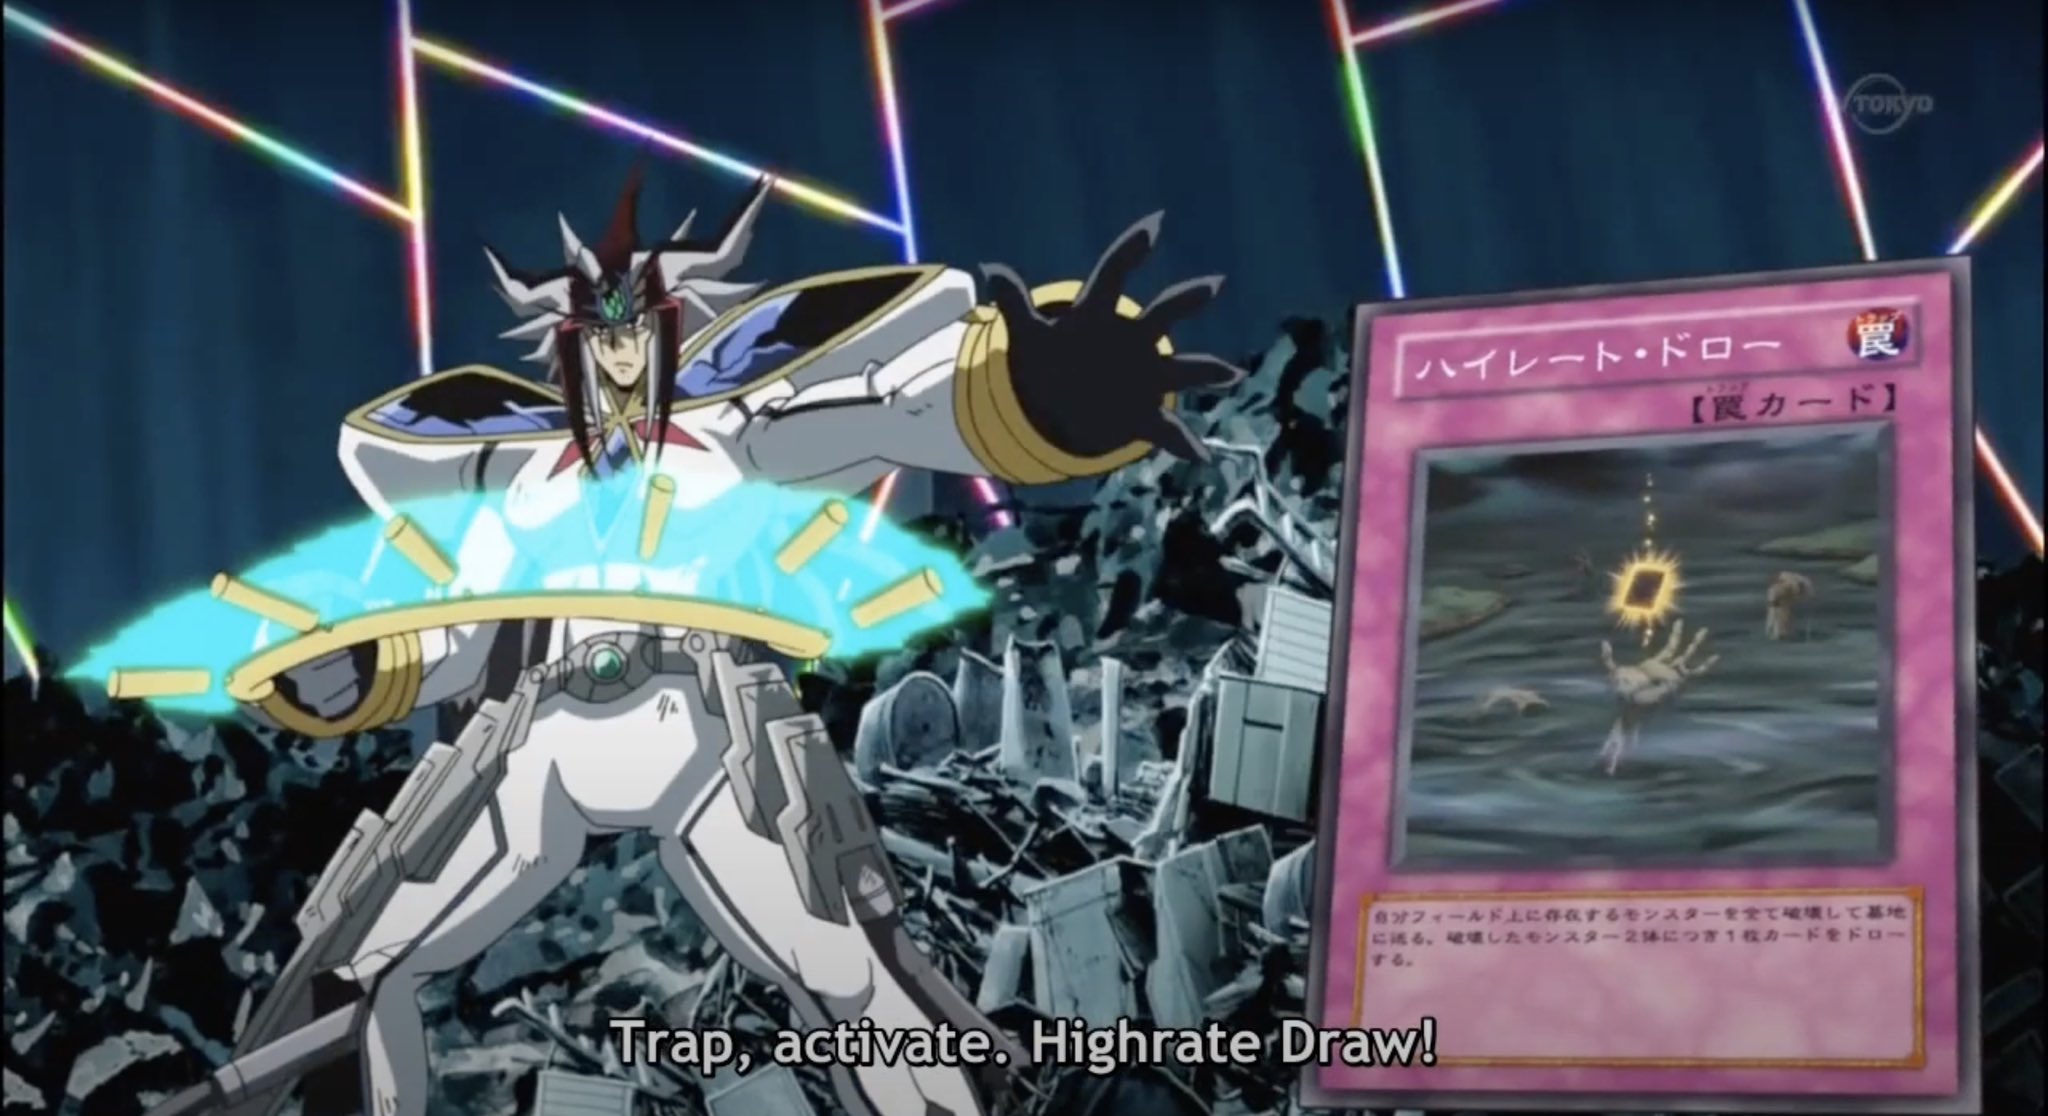 Yugioh News 𝗖𝗼𝗹𝗹𝗲𝗰𝘁𝗶𝗼𝗻 𝗣𝗮𝗰𝗸 High Rate Draw From The Yugioh 5d S Anime Will Finally Make Its Appearance This Card Appeared In Ep 147 In The Duel Between Aporia